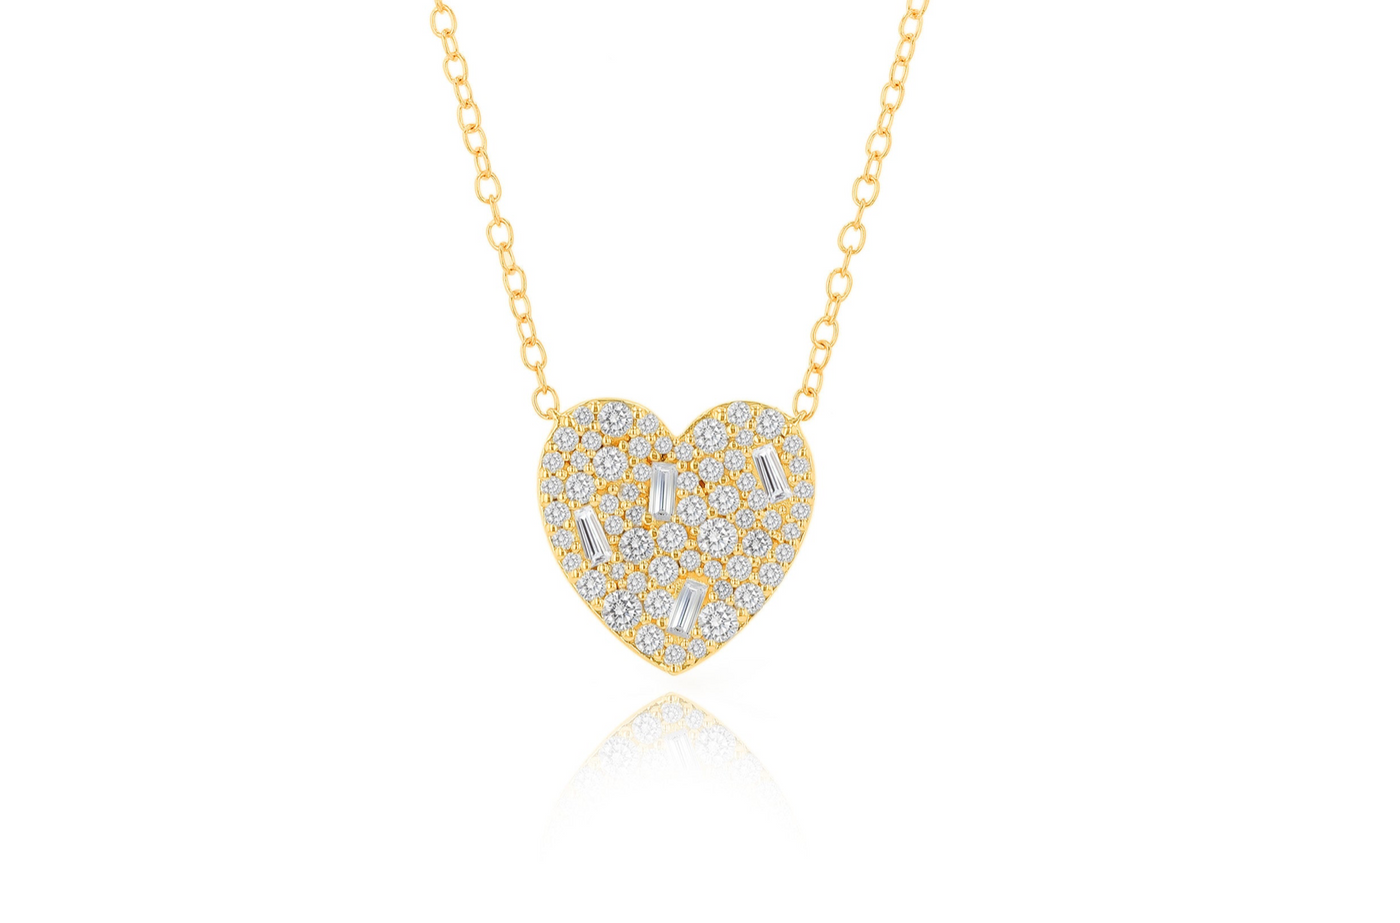 Scattered Diamond Heart Necklace